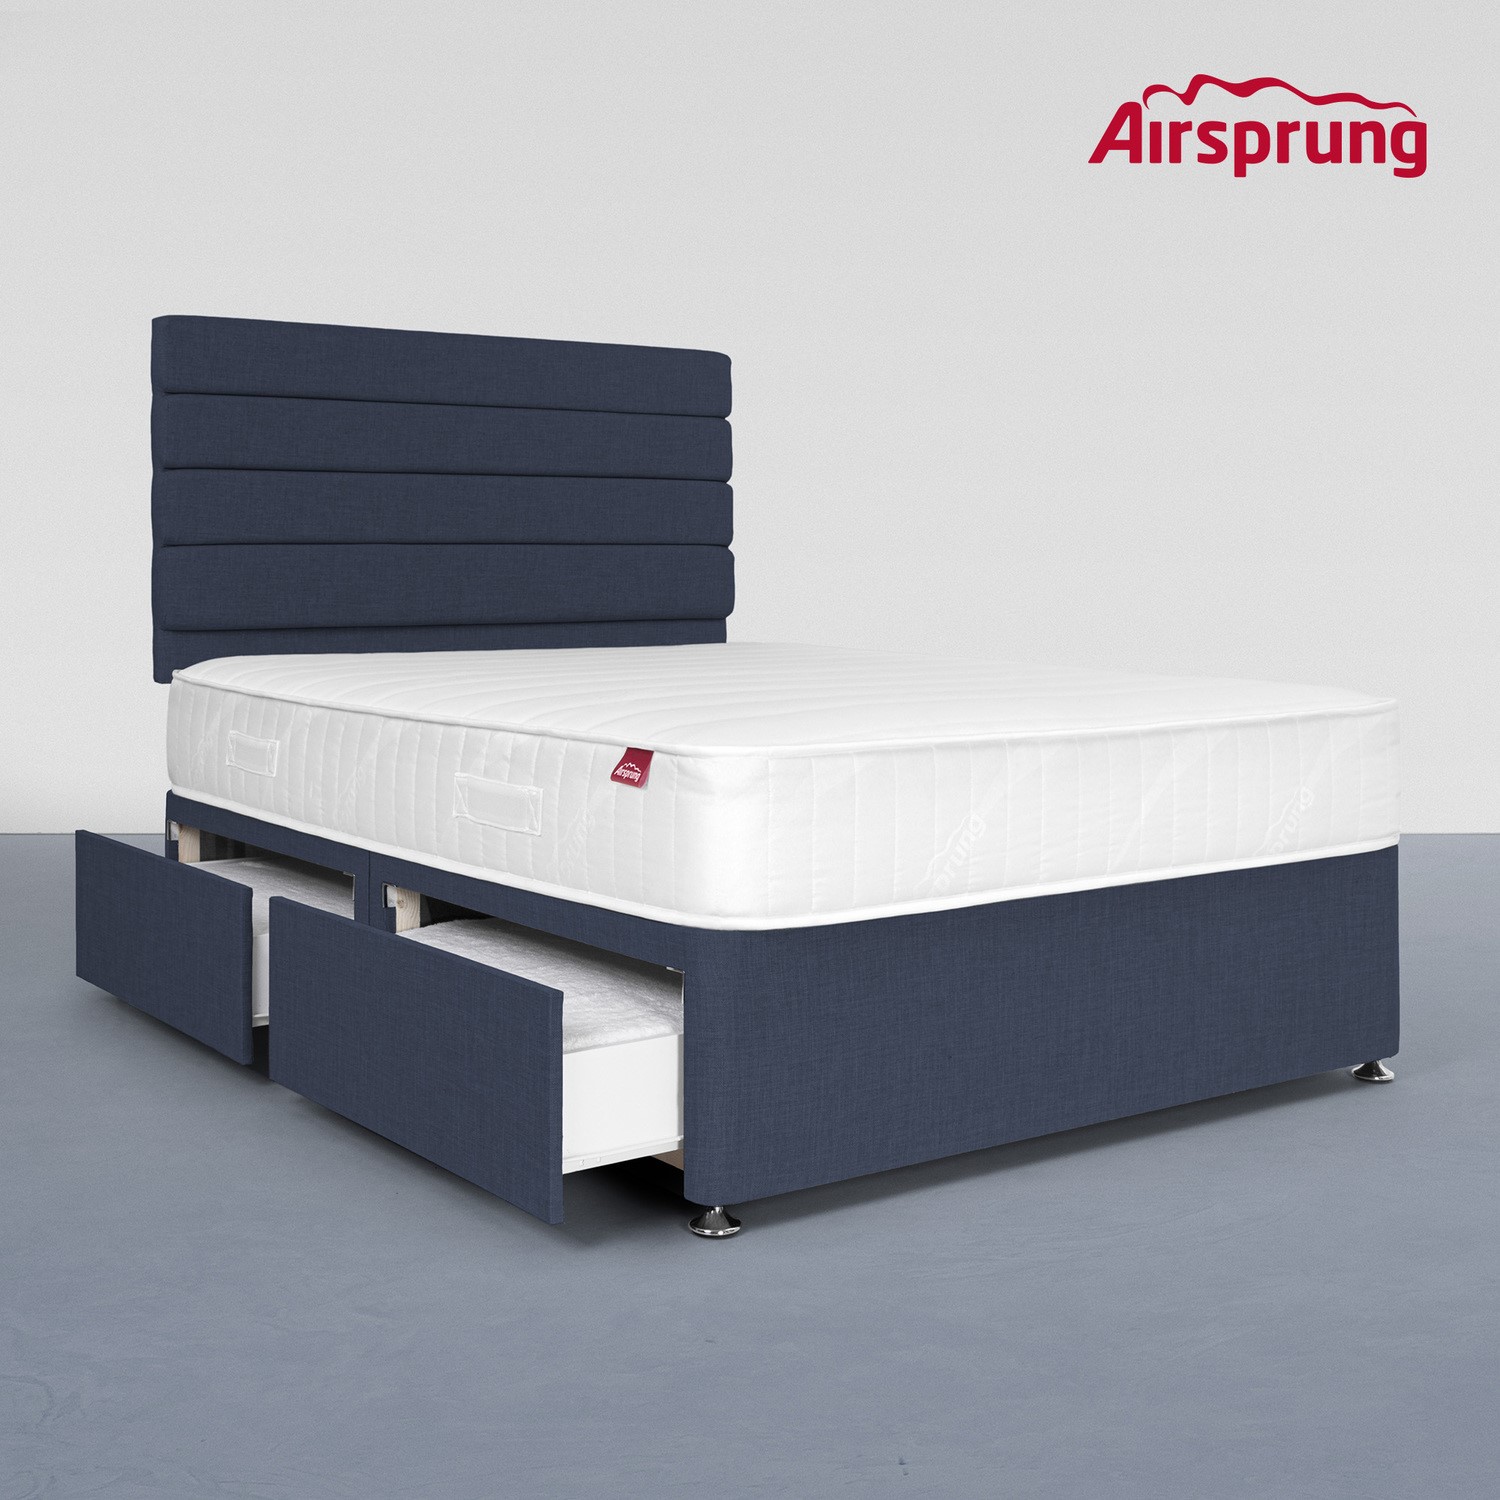 Read more about Airsprung small double 4 drawer divan bed with hybrid mattress midnight blue